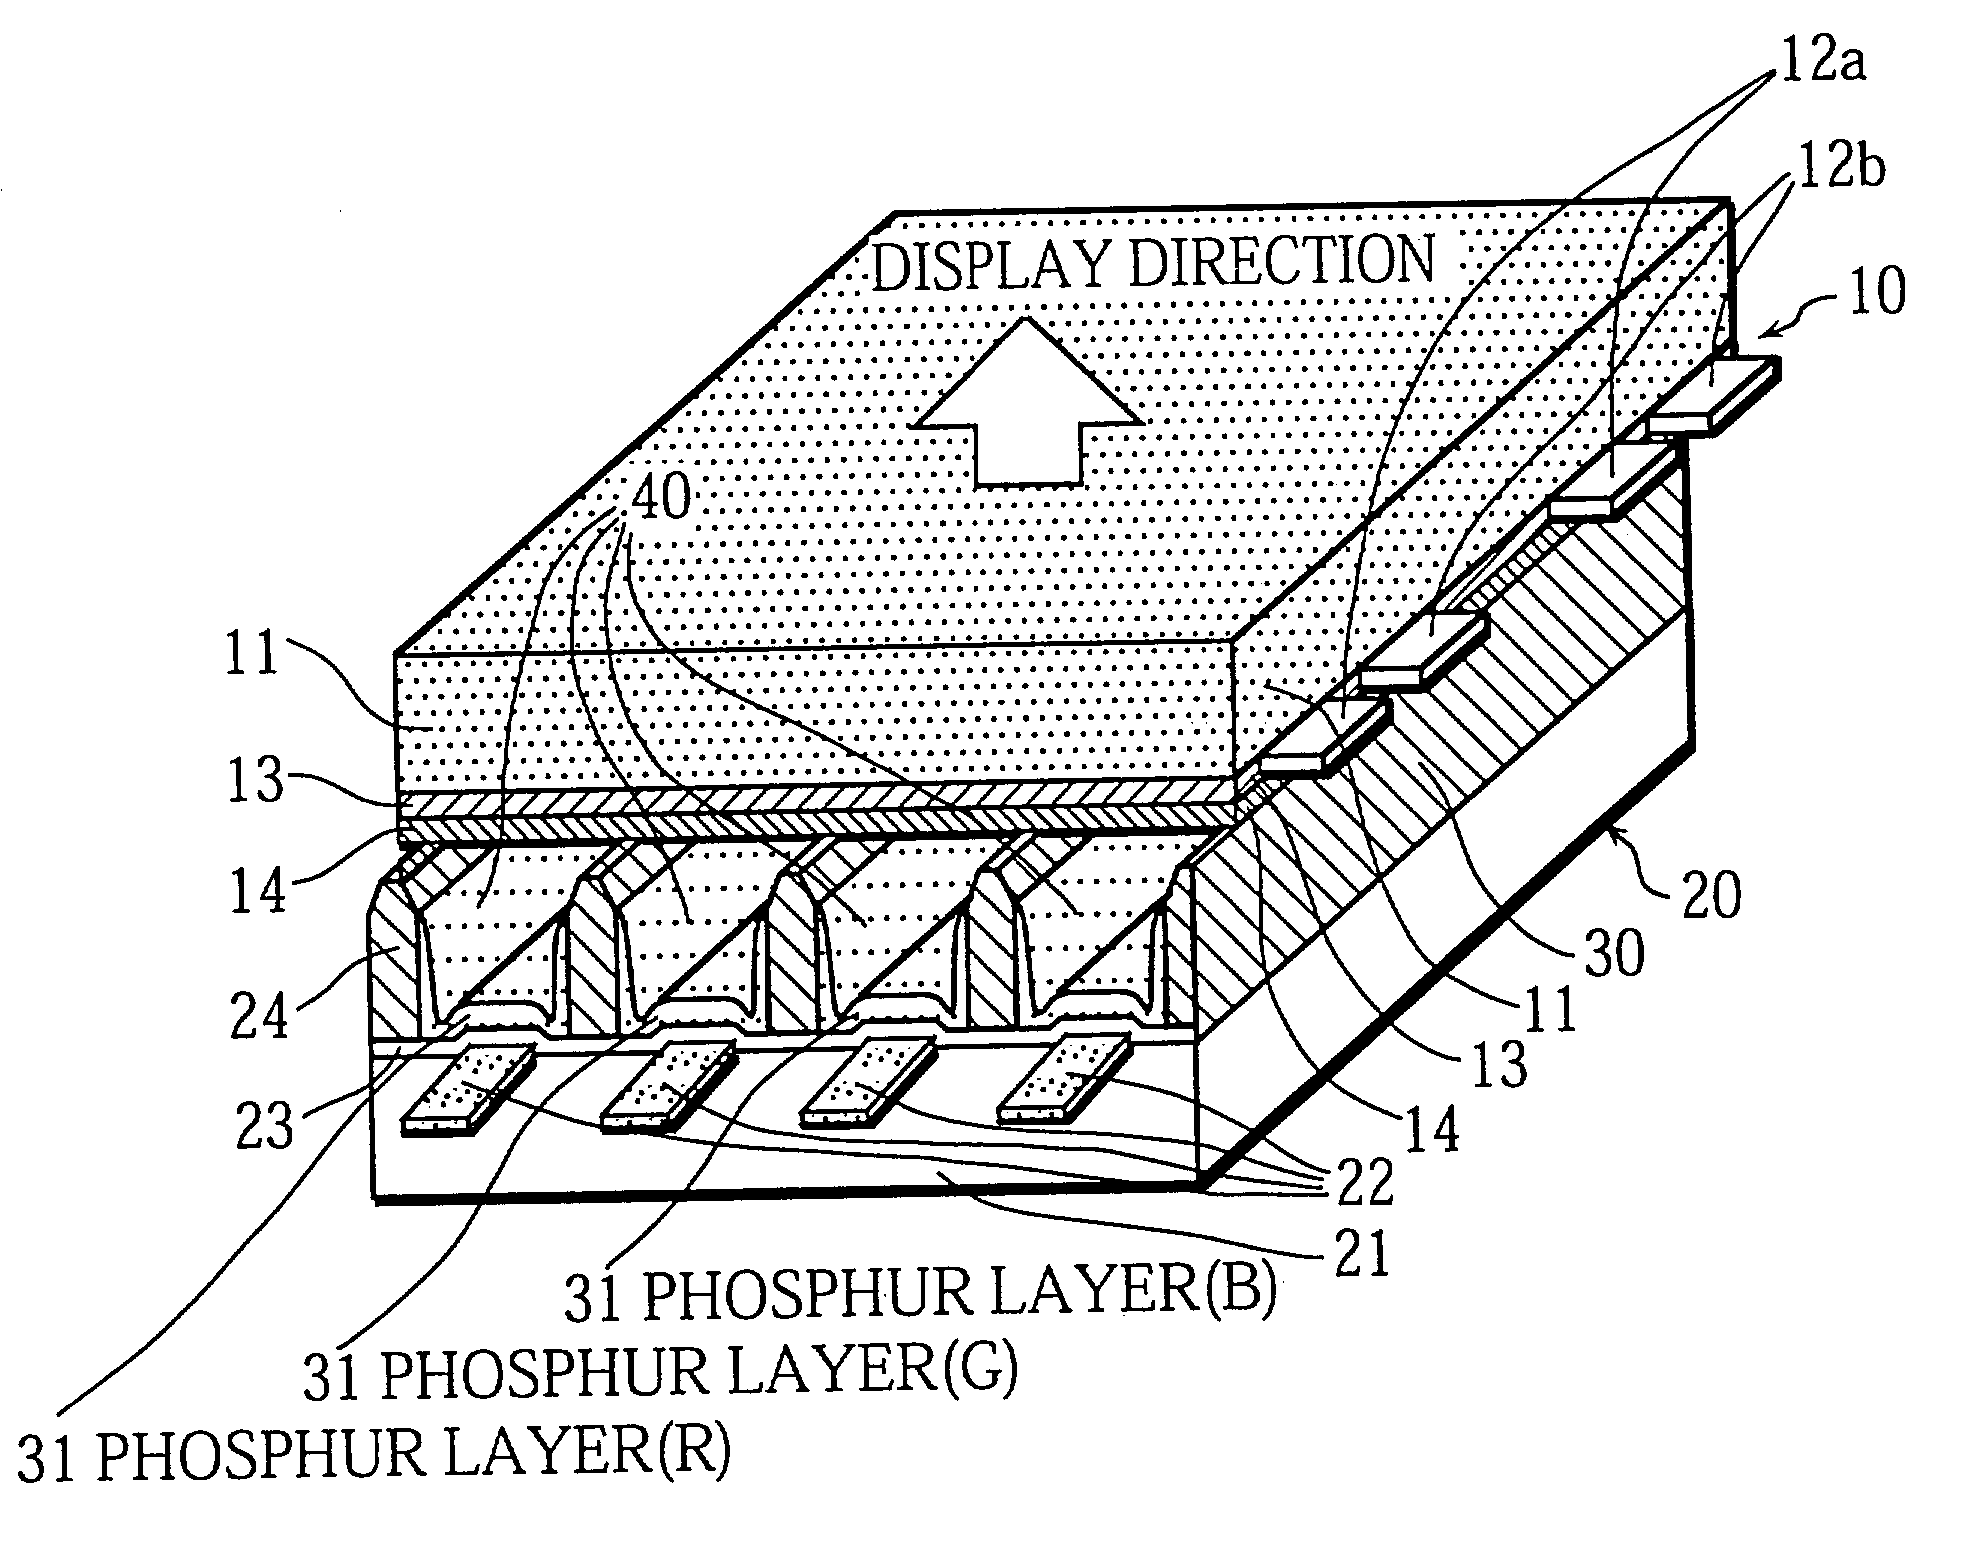 Plasma display panel manufacturing method for manufacturing a plasma display panel with superior picture quality, a manufacturing apparatus, and a phosphor ink